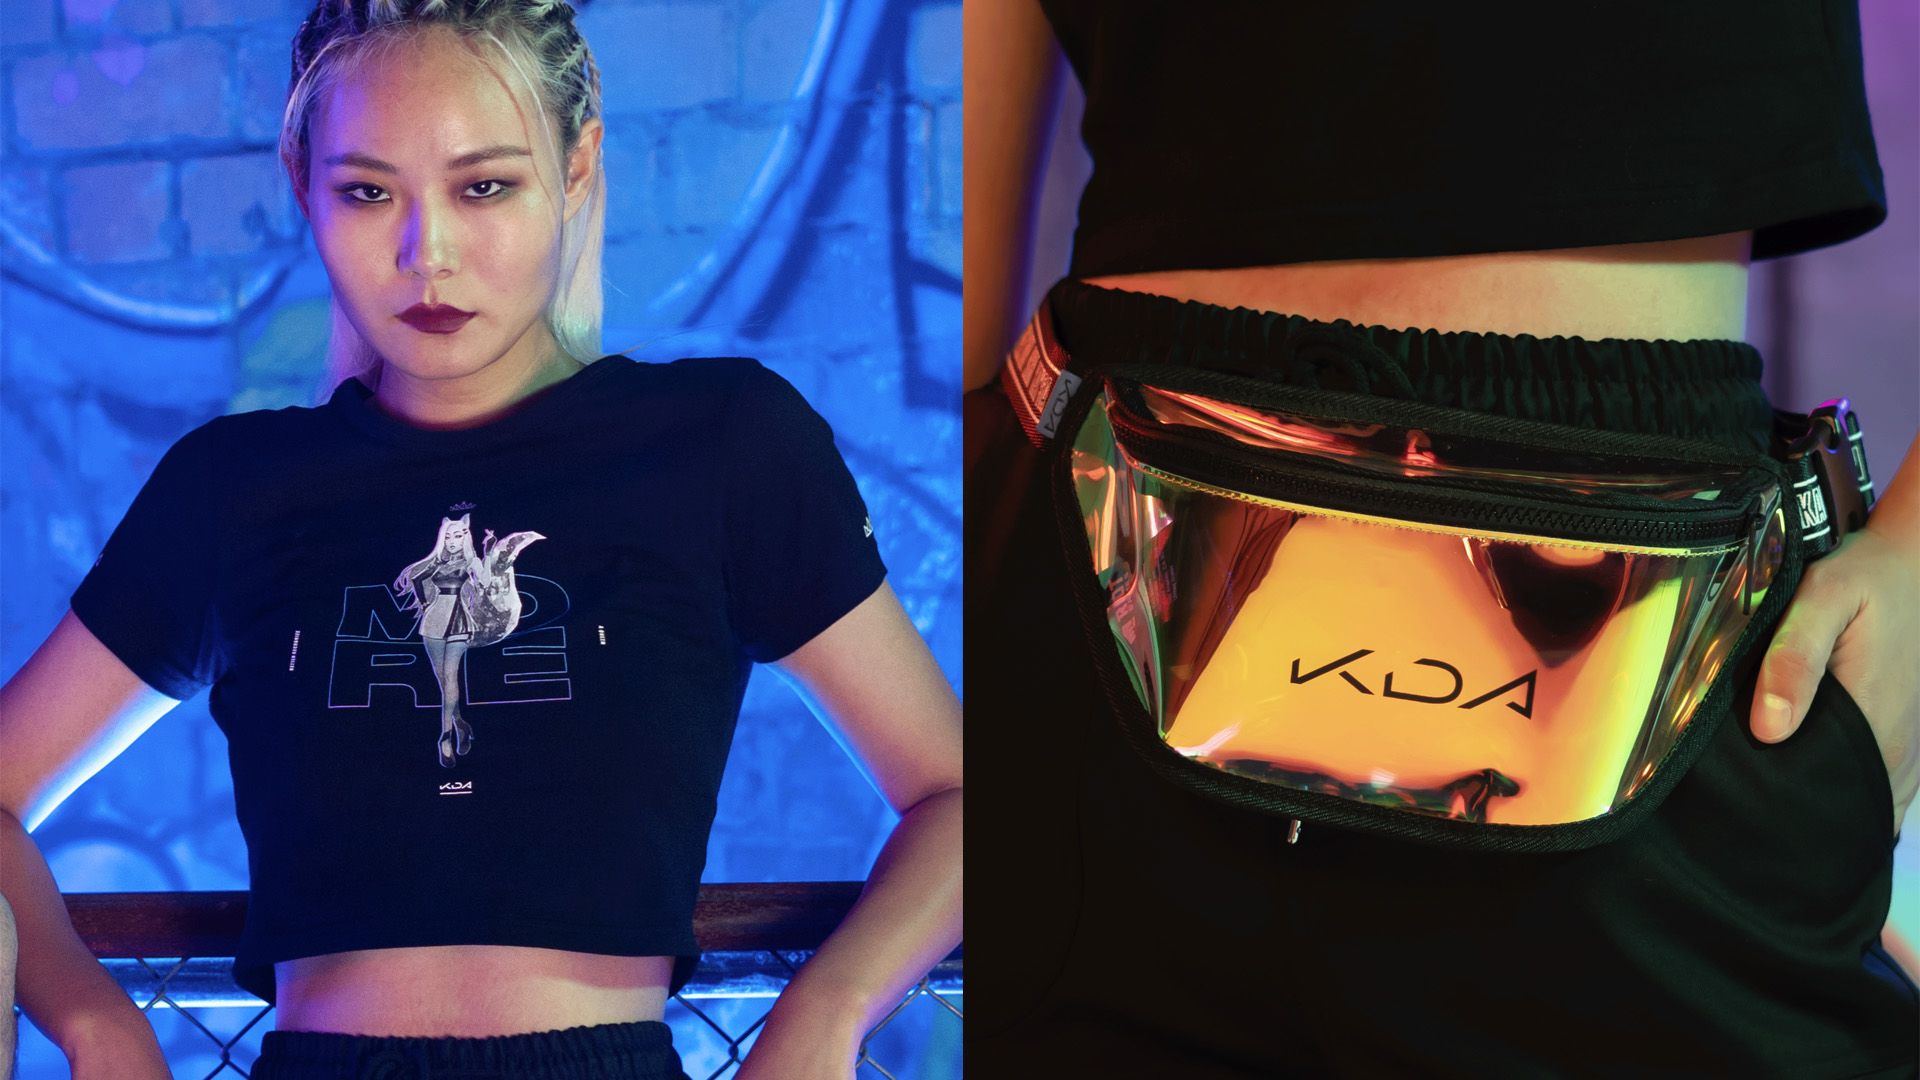 K/DA on X: Let's take it to the top. // Visiting @louisvuitton for a  fitting session today. #KDA #LVxKDA  / X